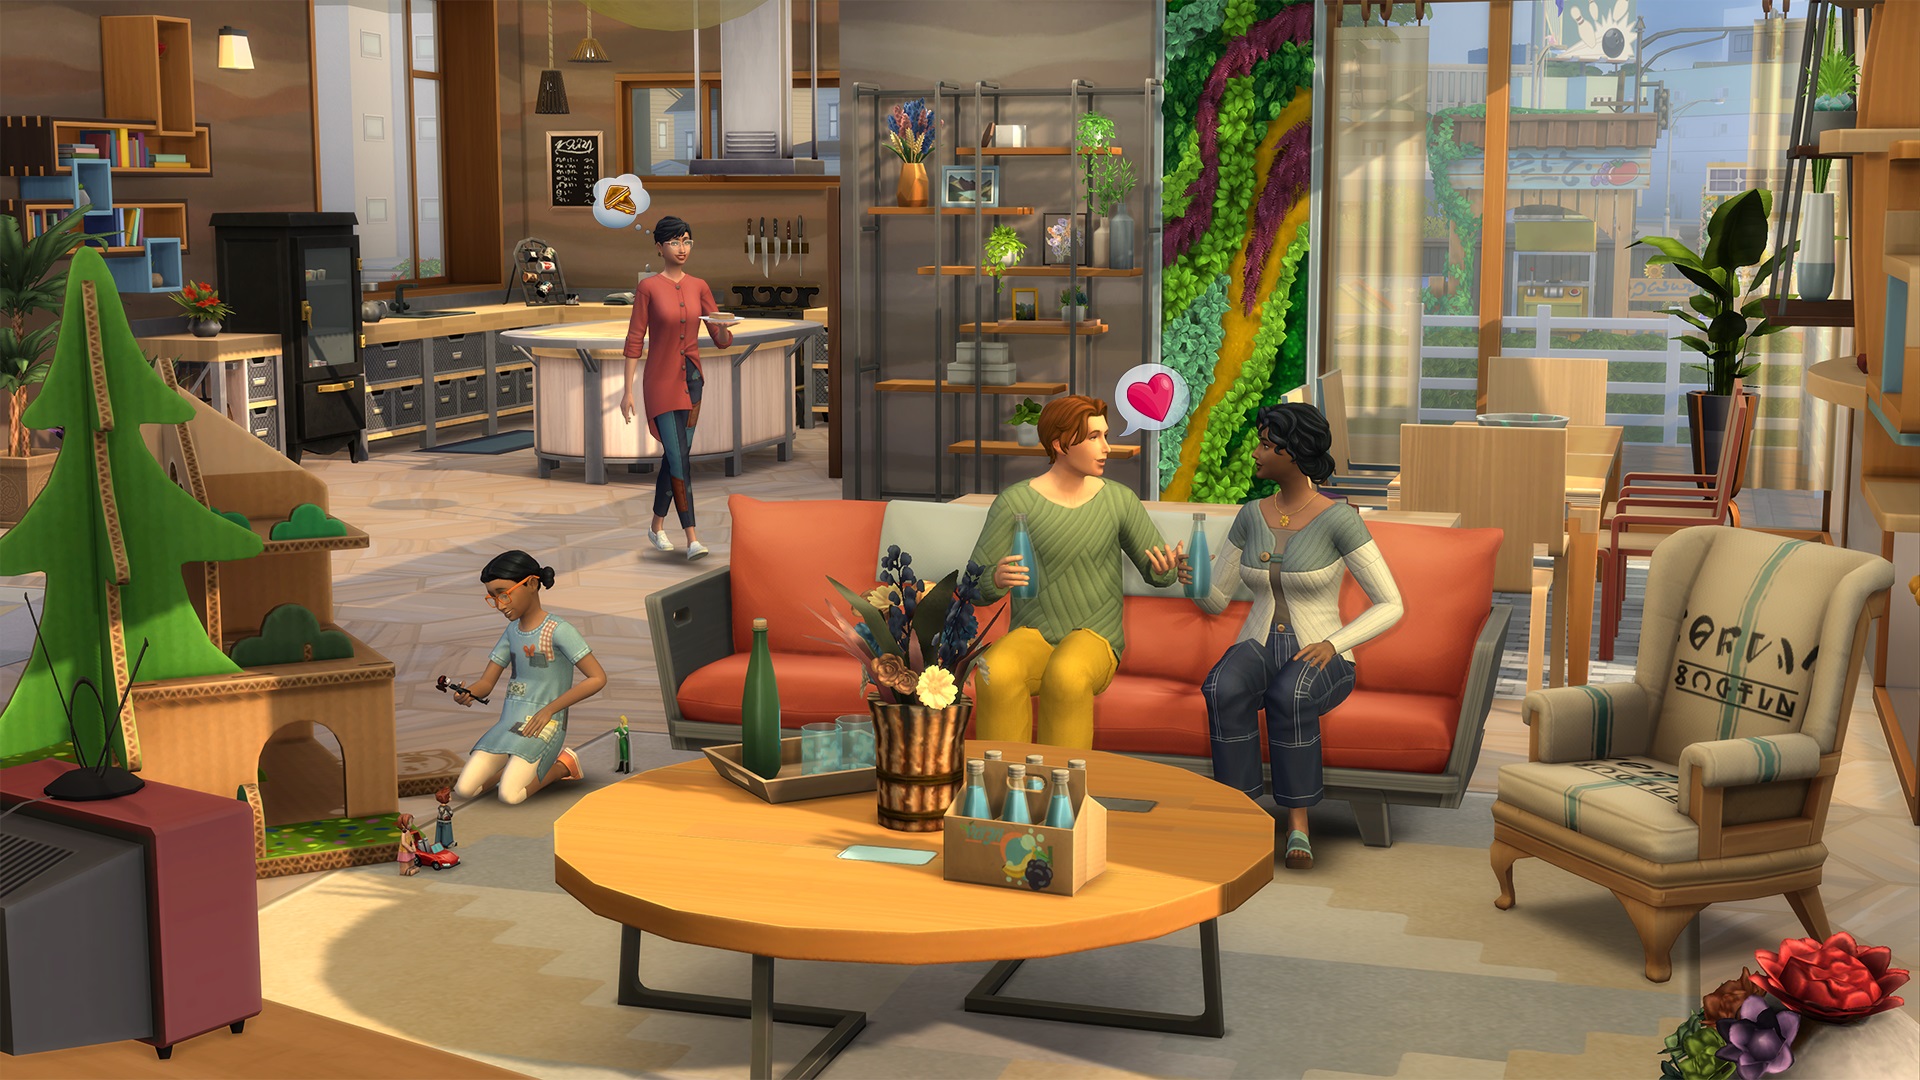 Teen life симс 4. The SIMS 4 экологичная жизнь. SIMS 4 Eco Lifestyle. The SIMS 4 Electronic Arts. 4 Sis.